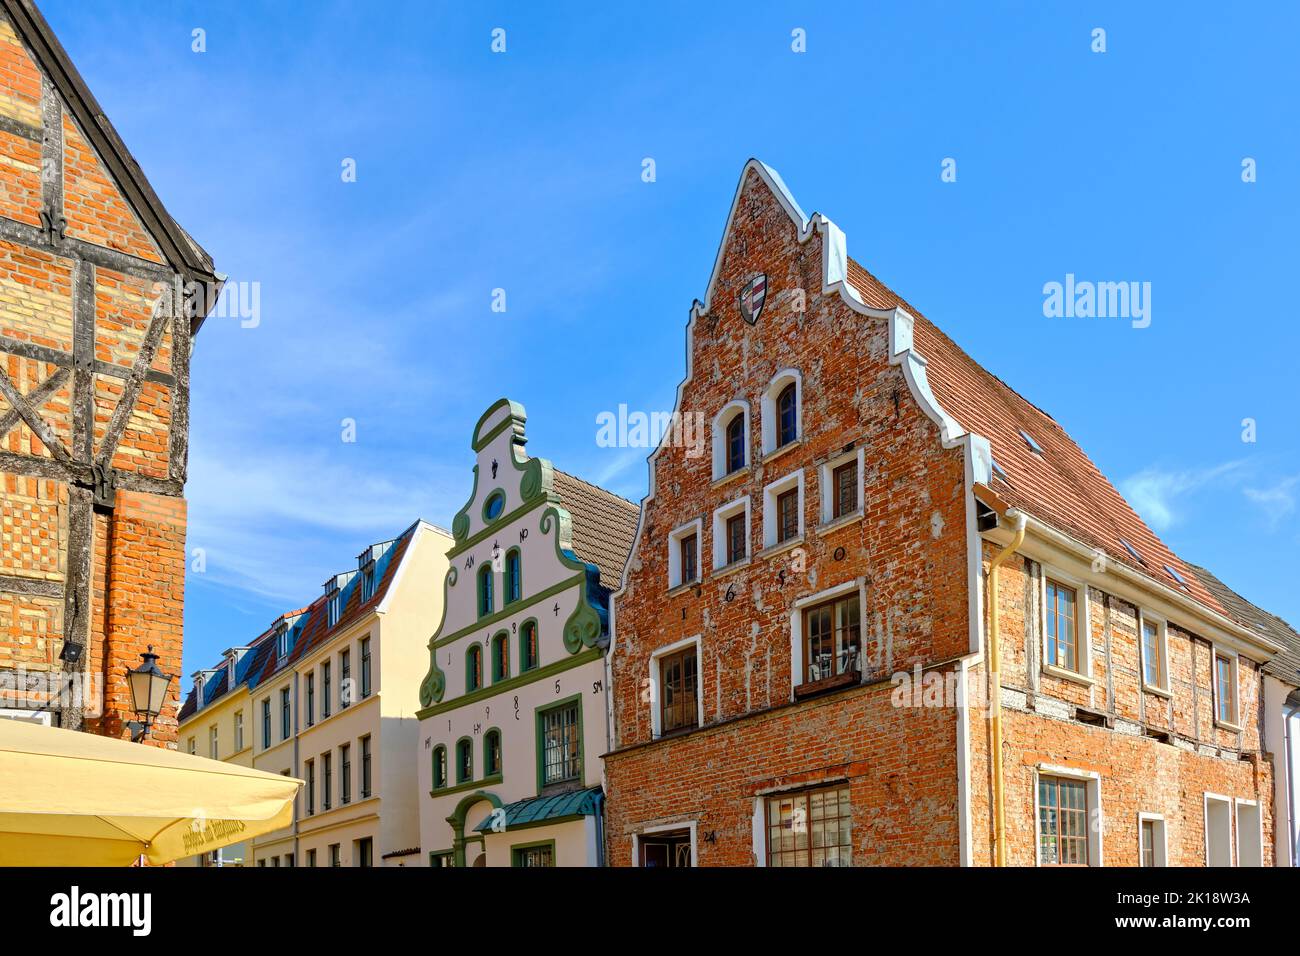 Brauhaus am Lohberg (Brewery at Lohberg), a listed medieval half-timbered building from 1452, Wismar, Germany. Stock Photo